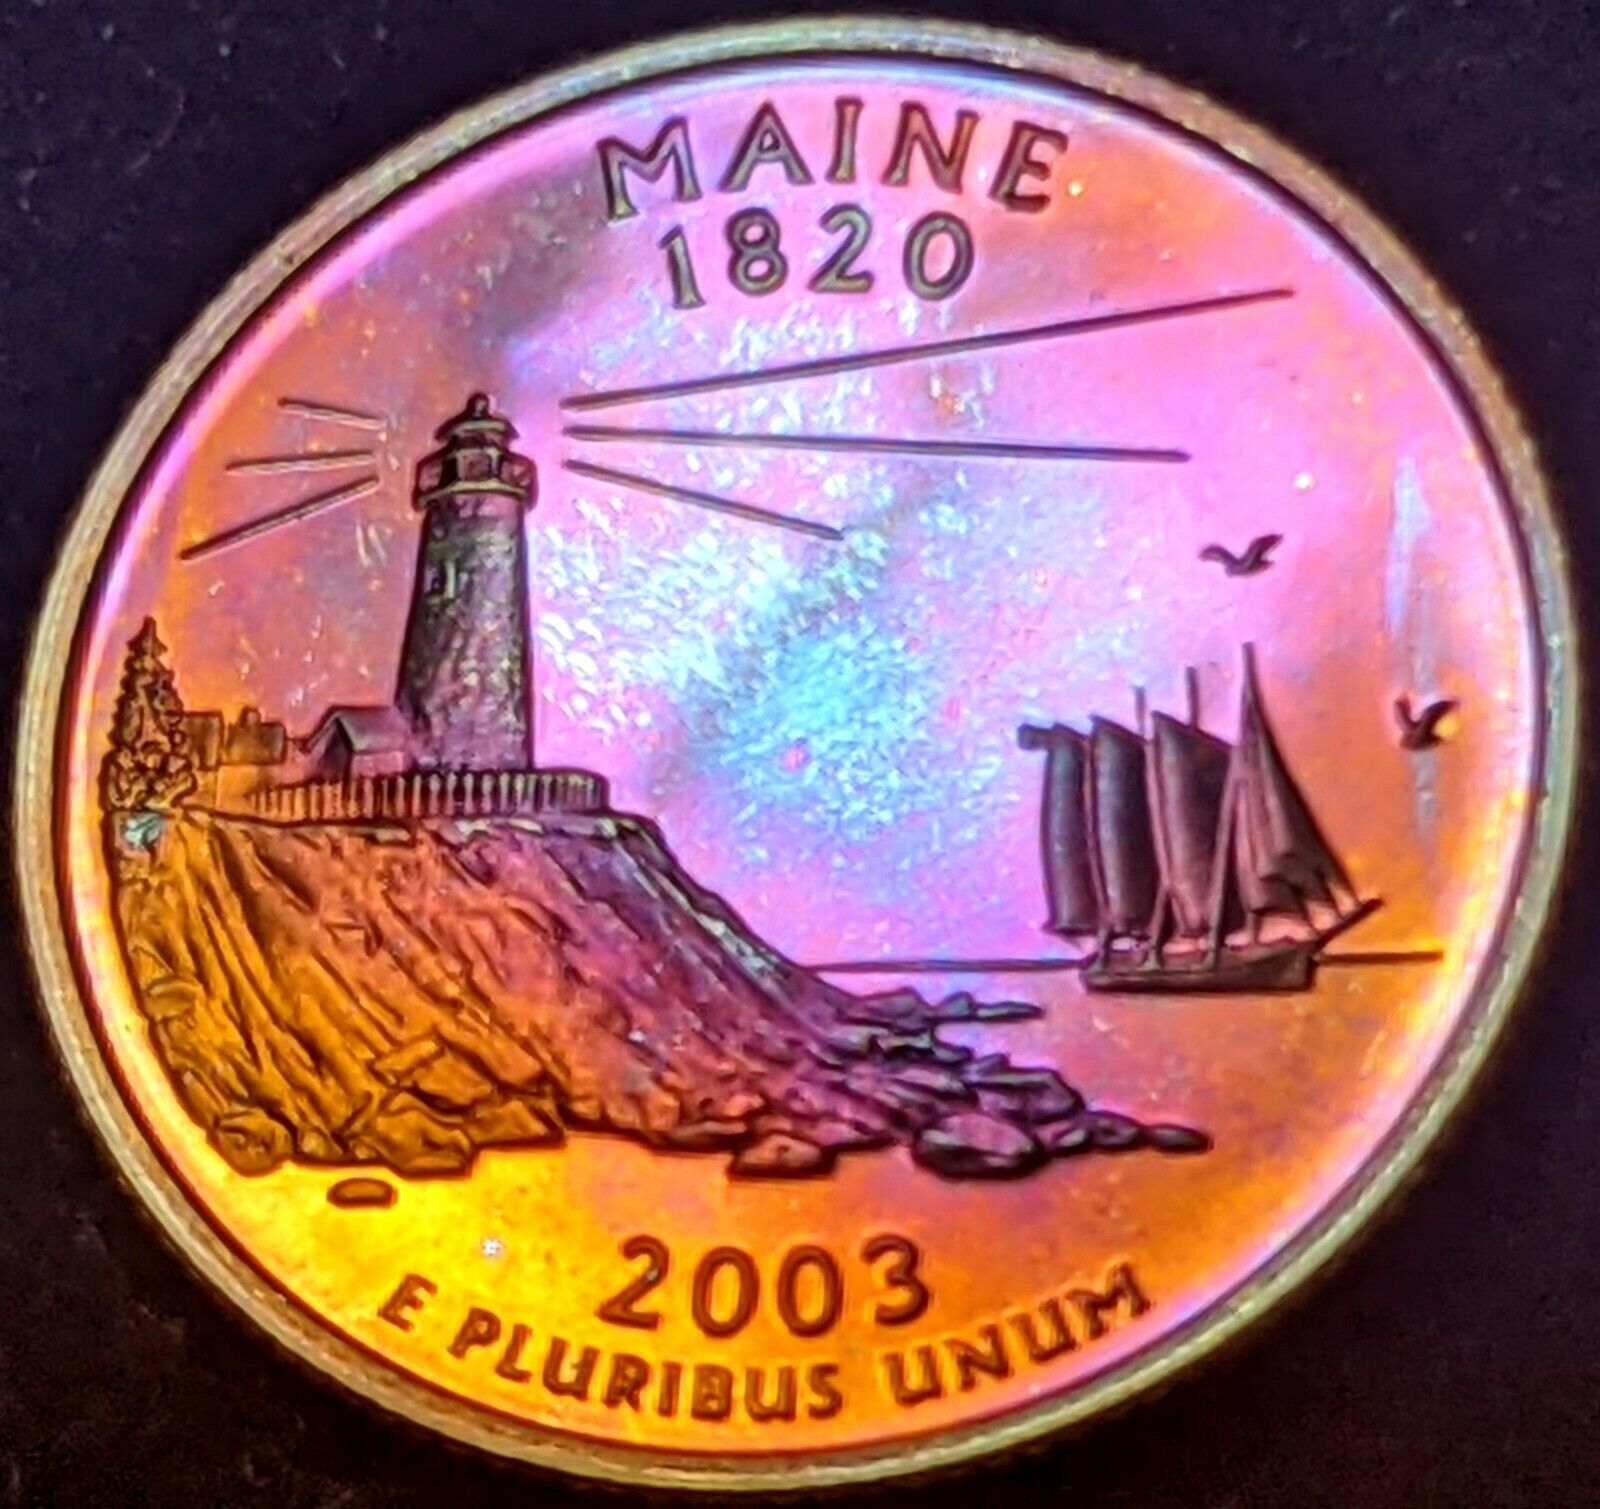 2003 S Me Maine State Quarter Proof Toned - Stunning - 21744